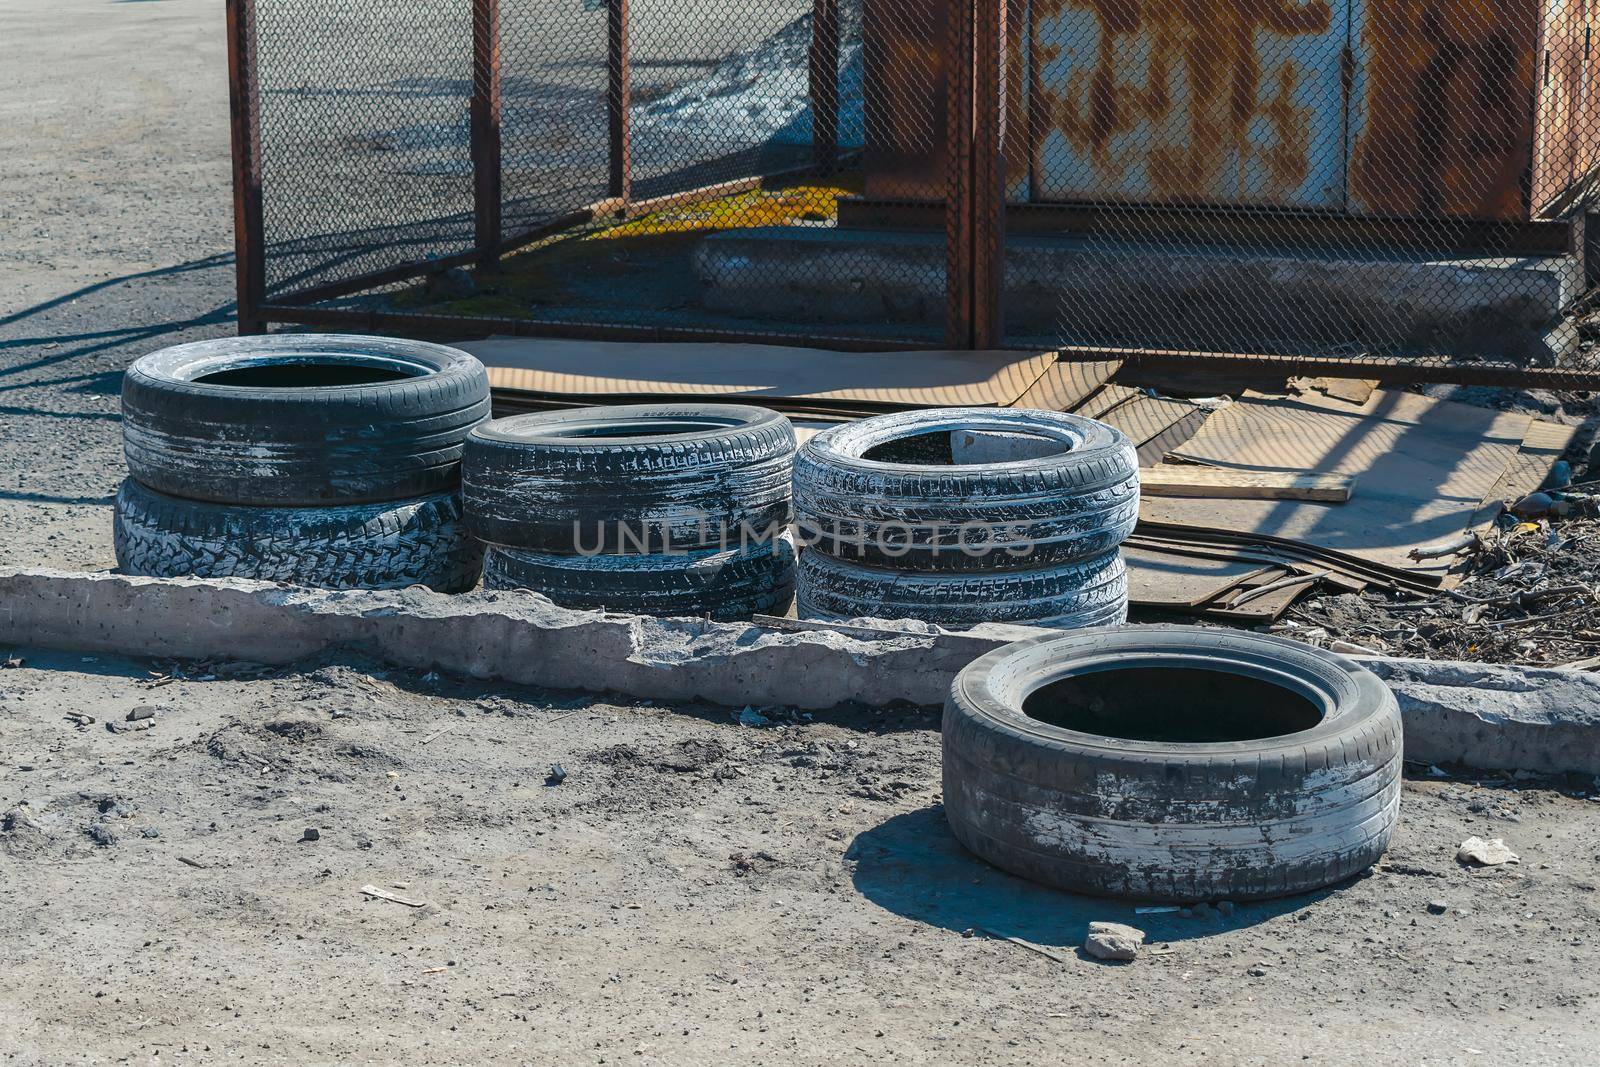 A pile of used car tires lies on the sand in an old dump near the road